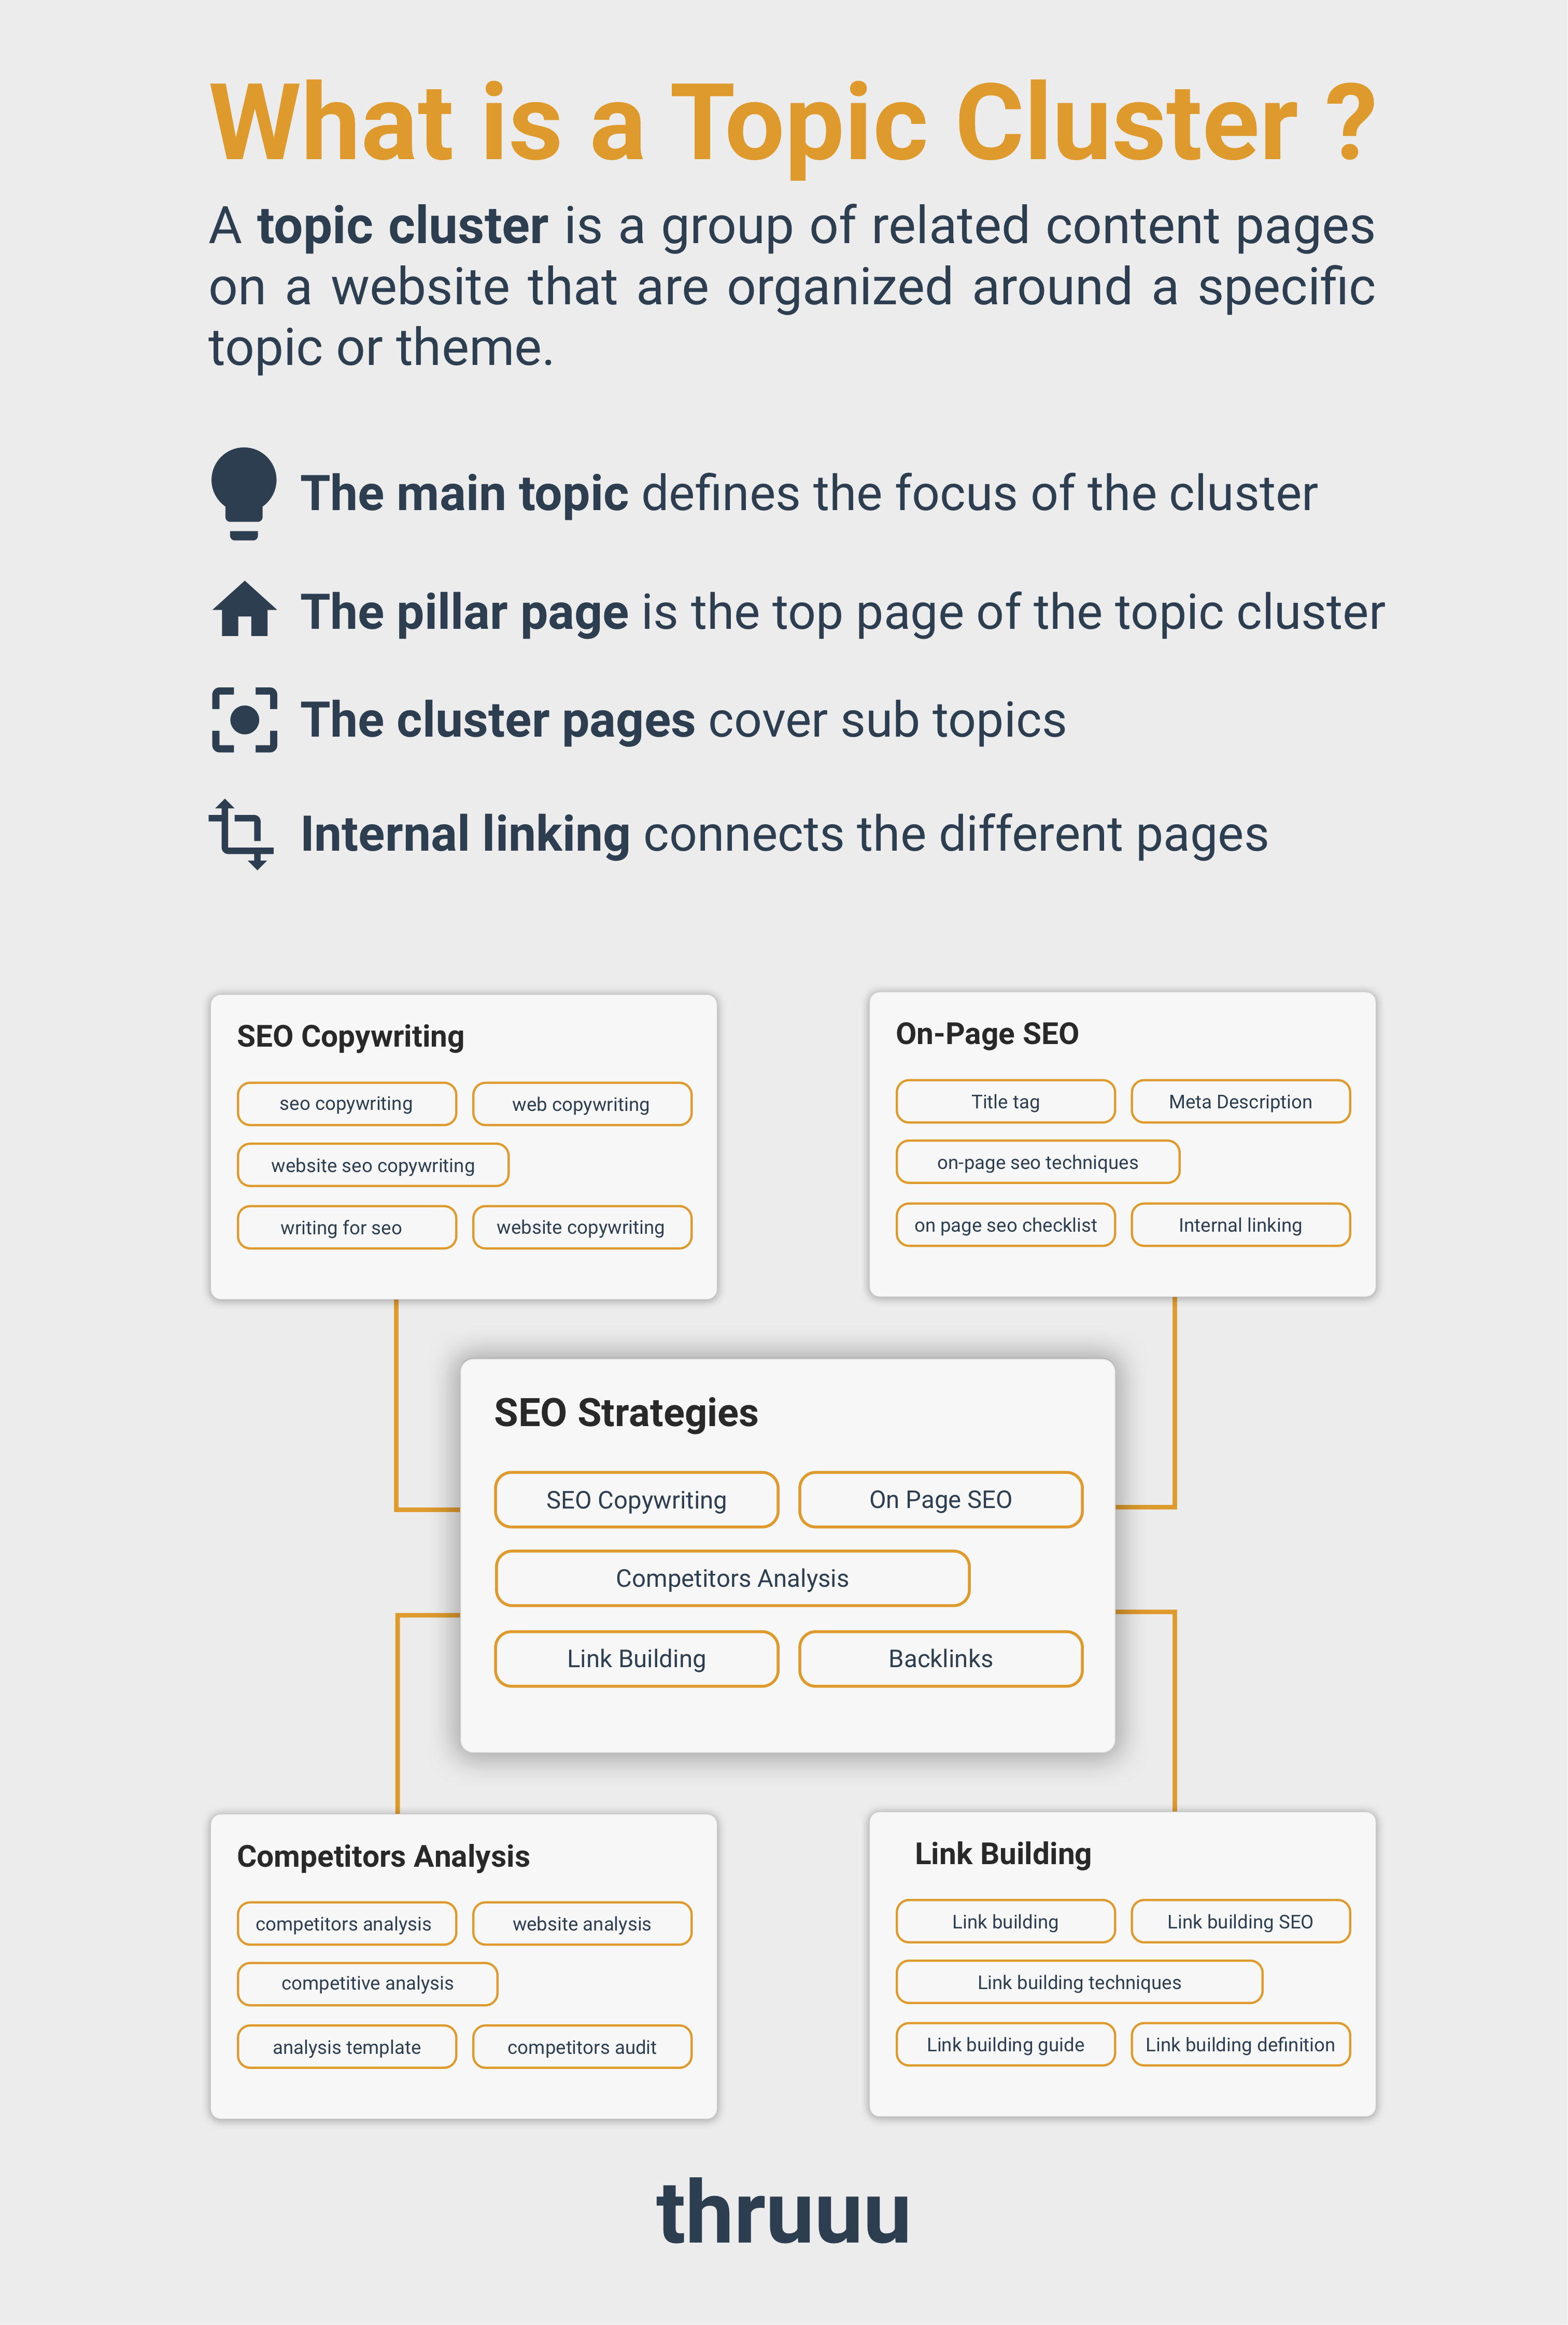 What is a Topic Cluster?